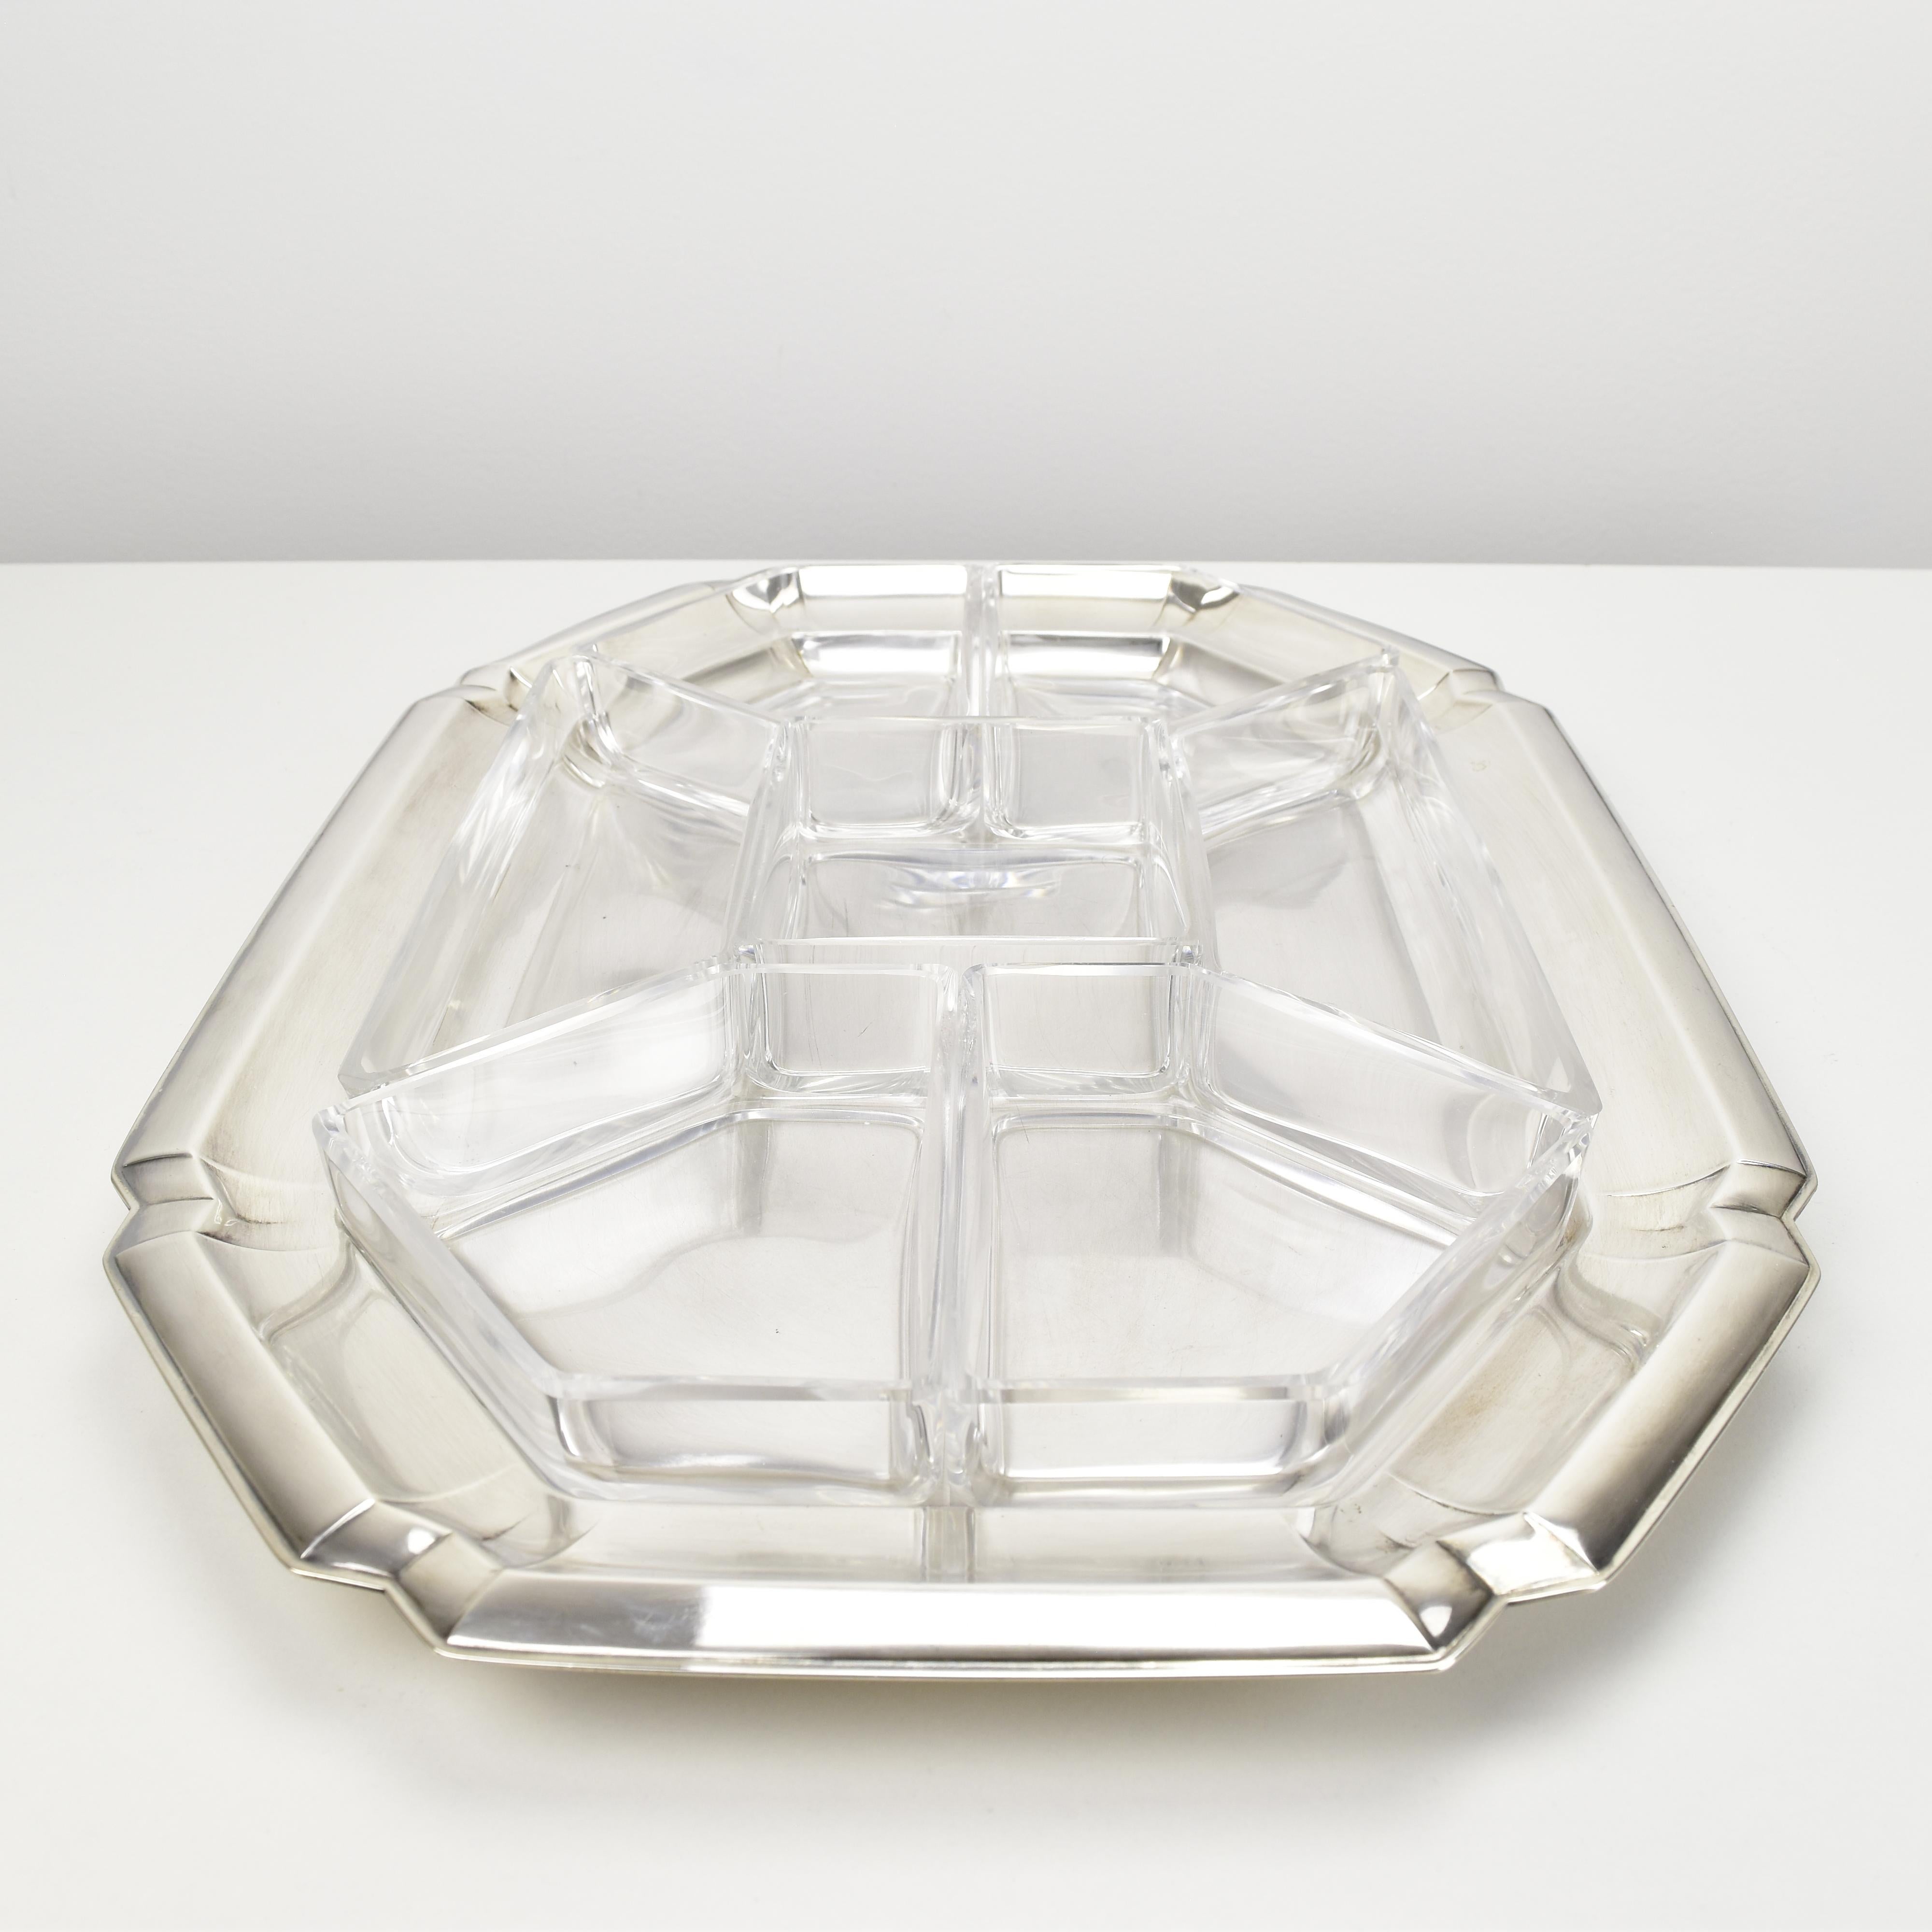 Silver Plate Large Art Deco Cabaret Bar Snack Tray by Quist Silverplate & Cut Crystal Liners For Sale